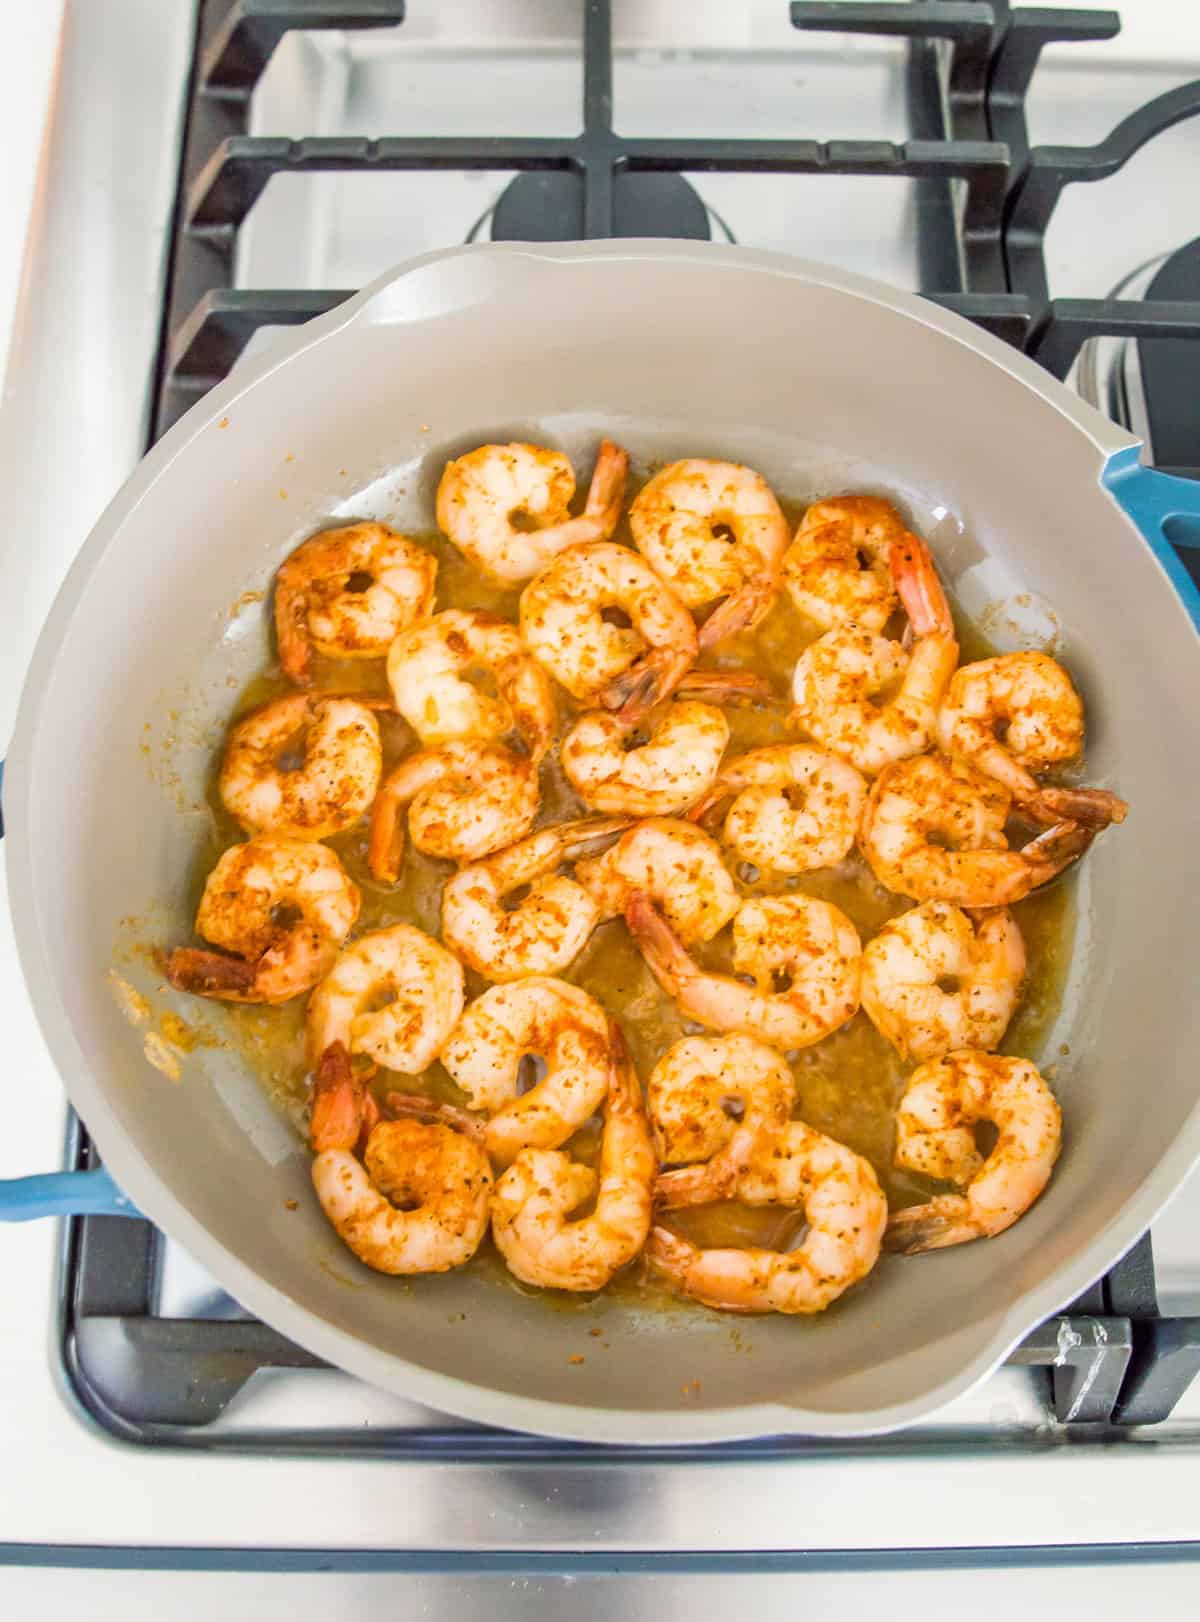 Shrimp being fried in a pan on the stovetop.